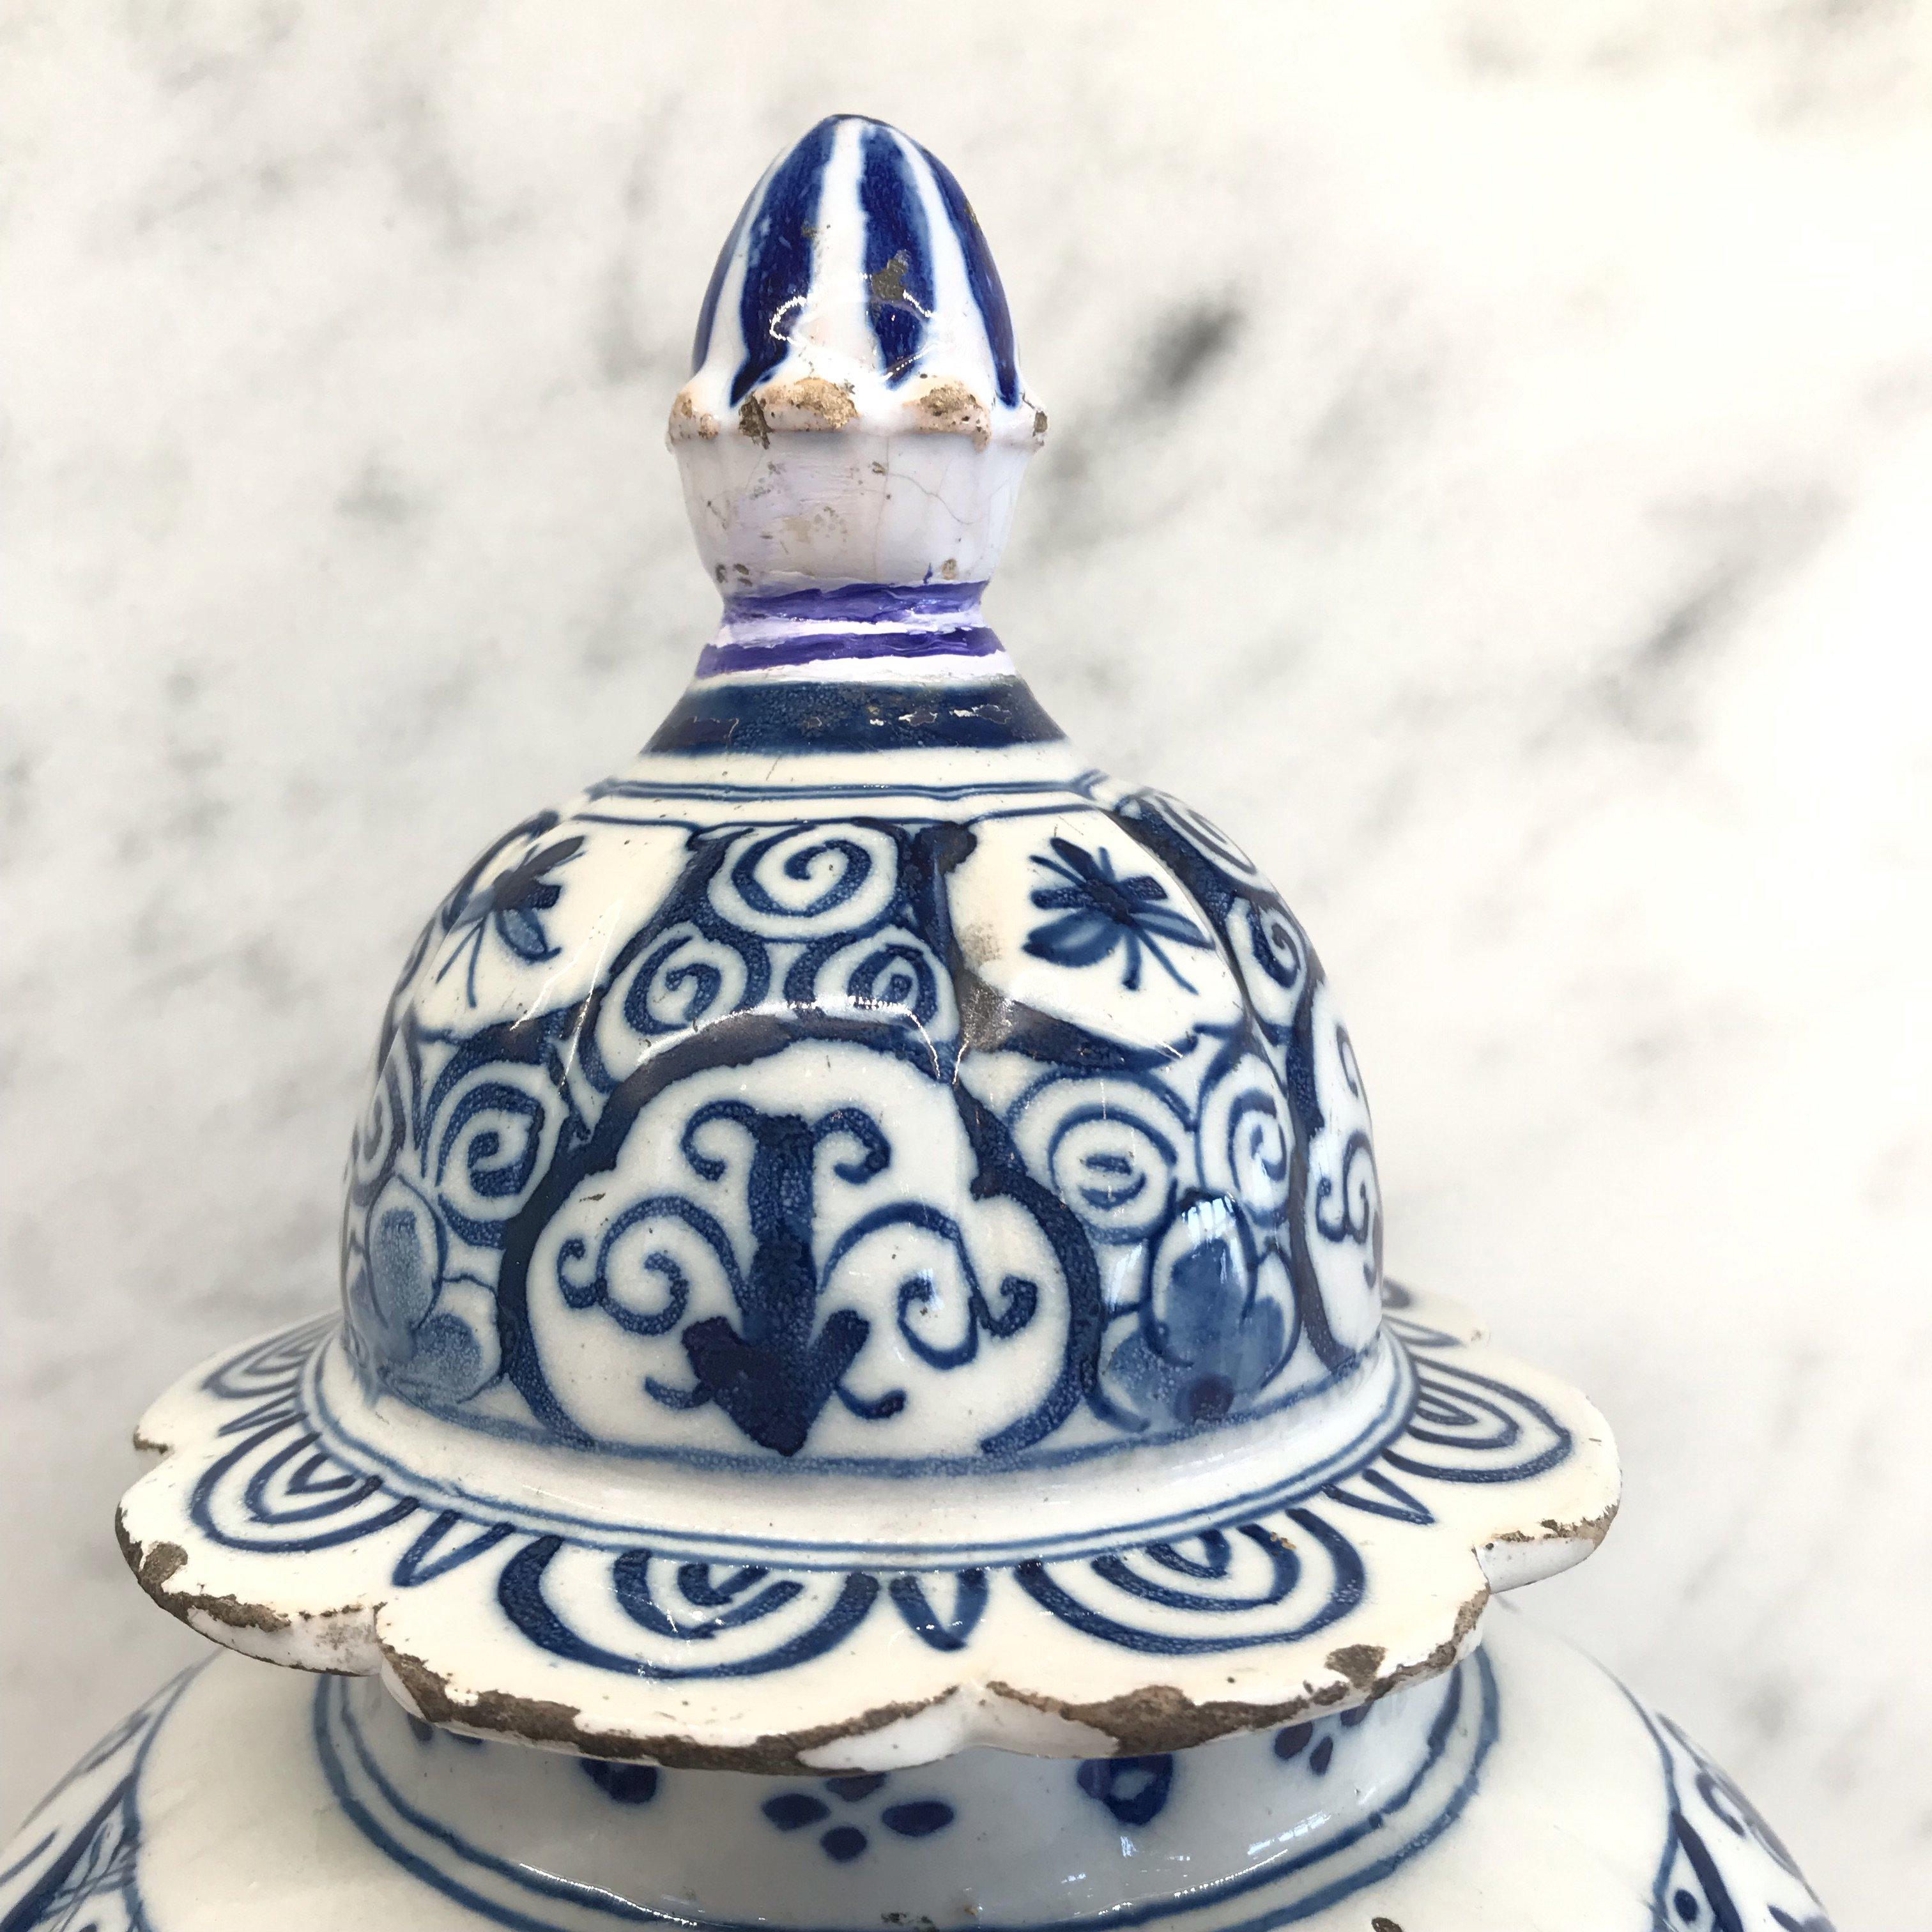 A Delft blue and white covered vase decorated with blue flowers. The cover is topped by a traditional ball finial. The back of the vase is decorated with a single Artemisia leaf. Small edge chips restored, ball finial earlier replacement.
#4278.